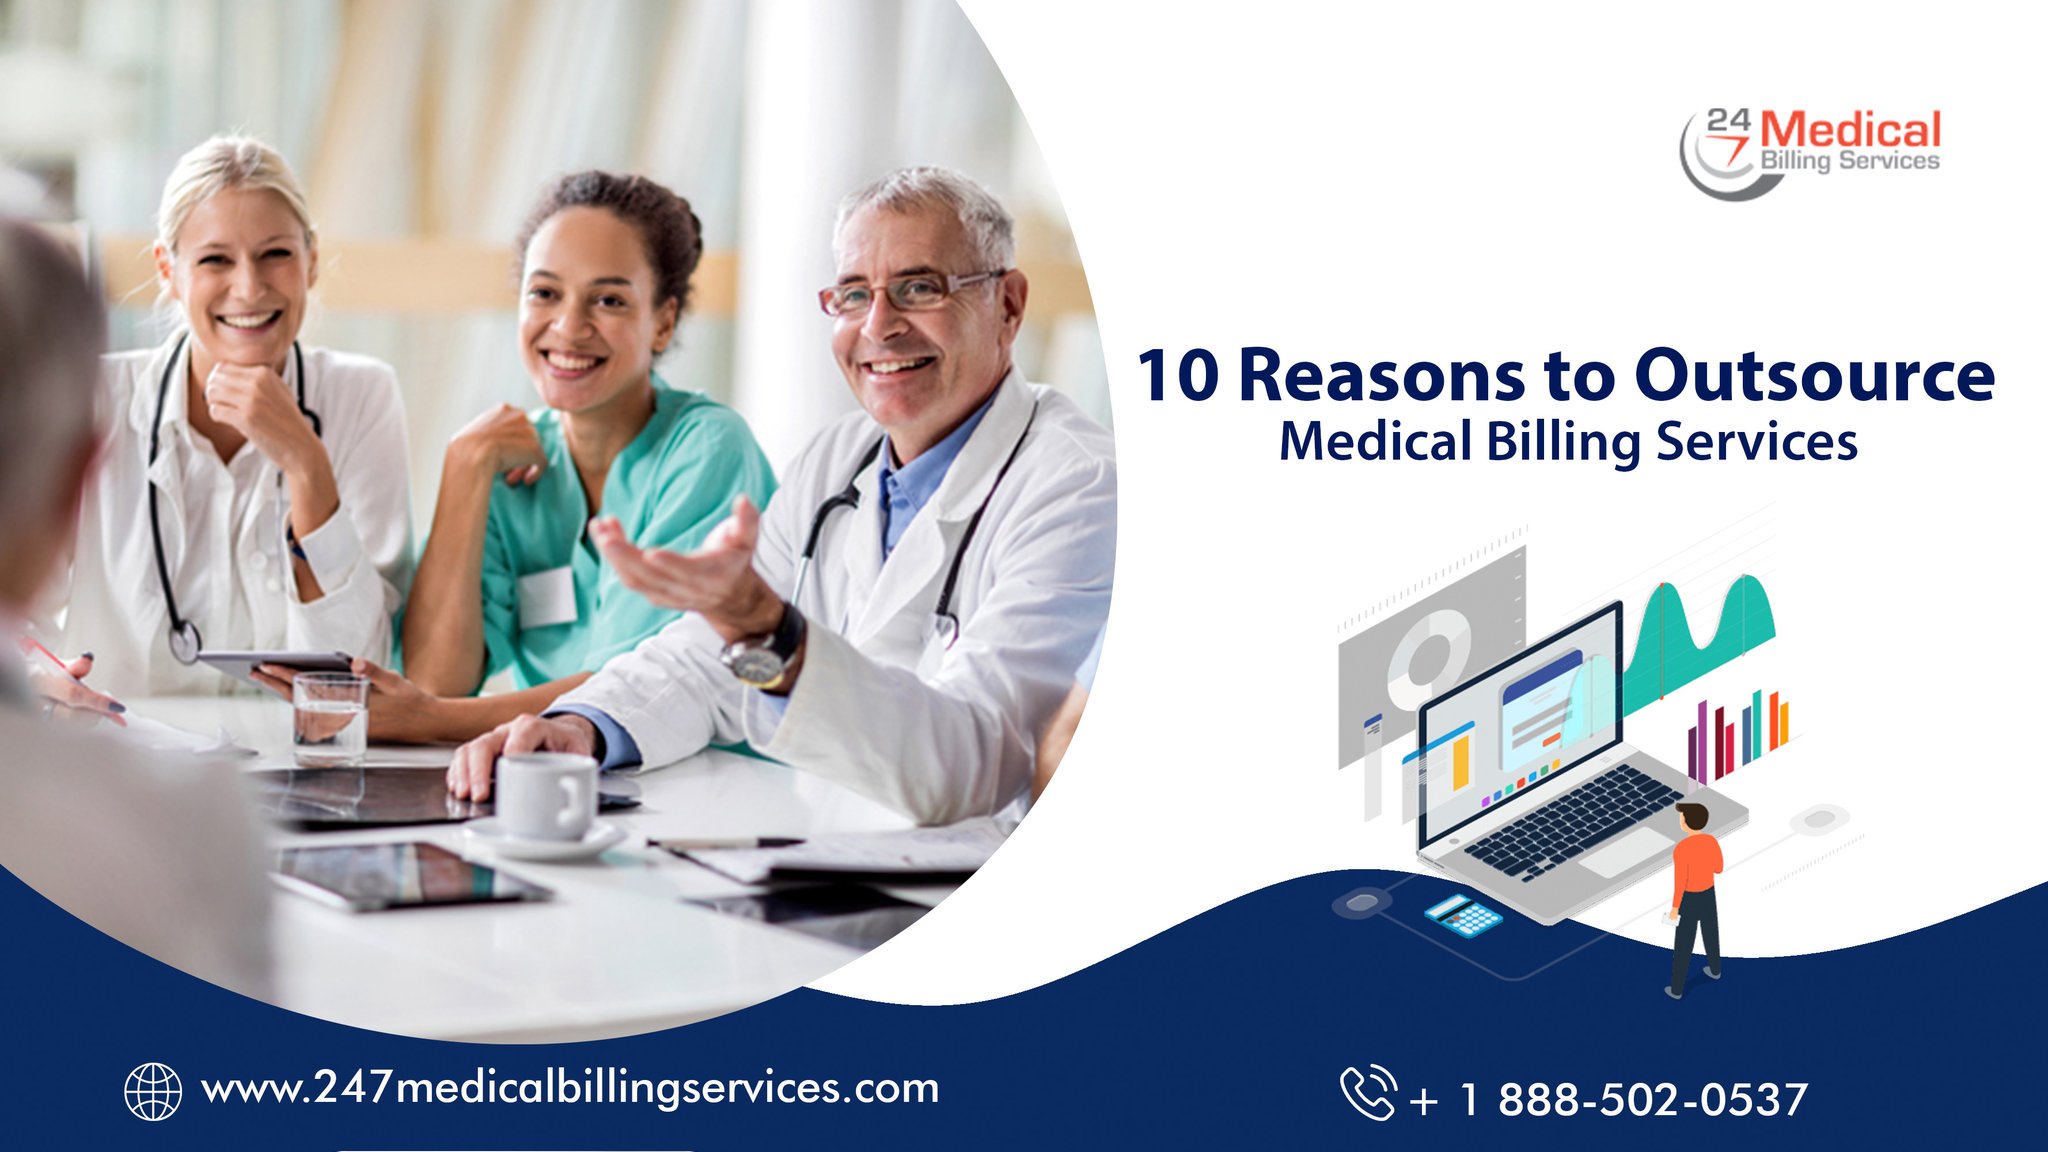  10 reasons to Outsource Medical Billing Services